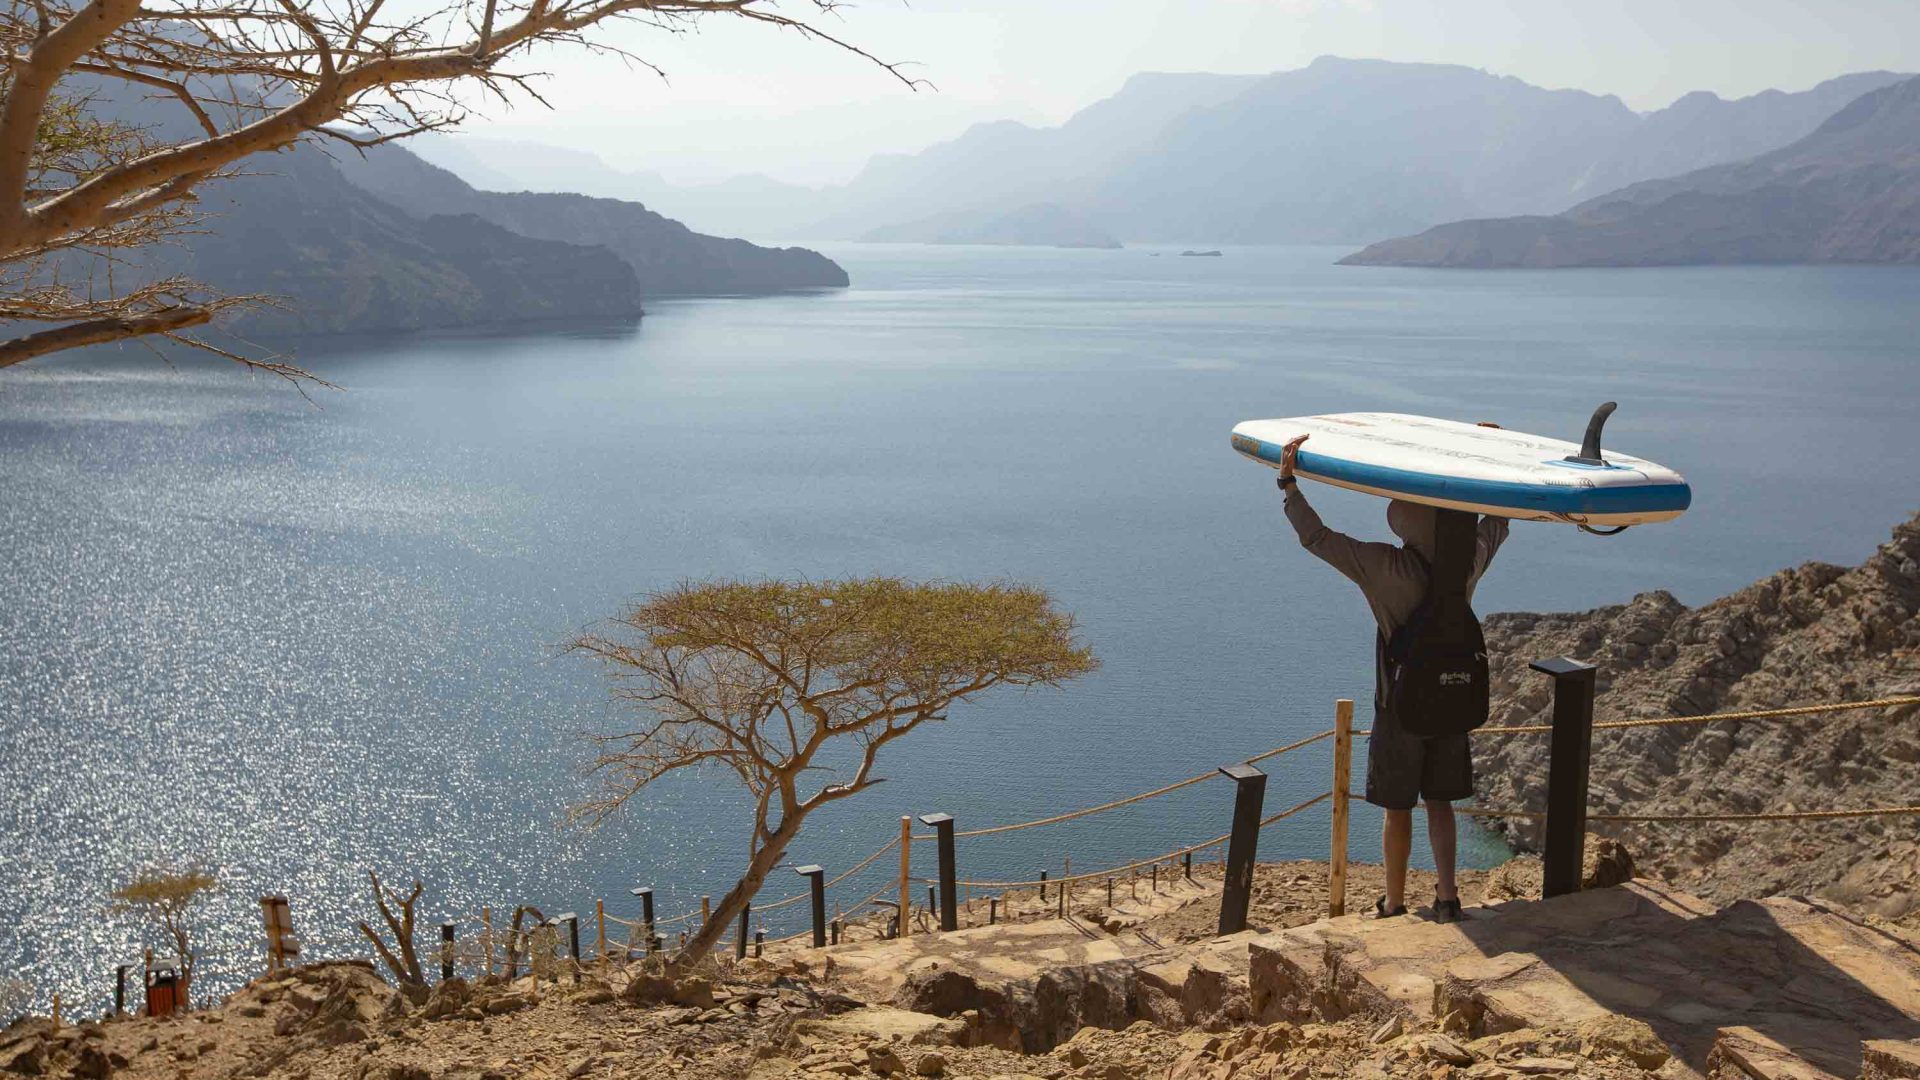 A person with a paddleboard on his head looks out over the view.